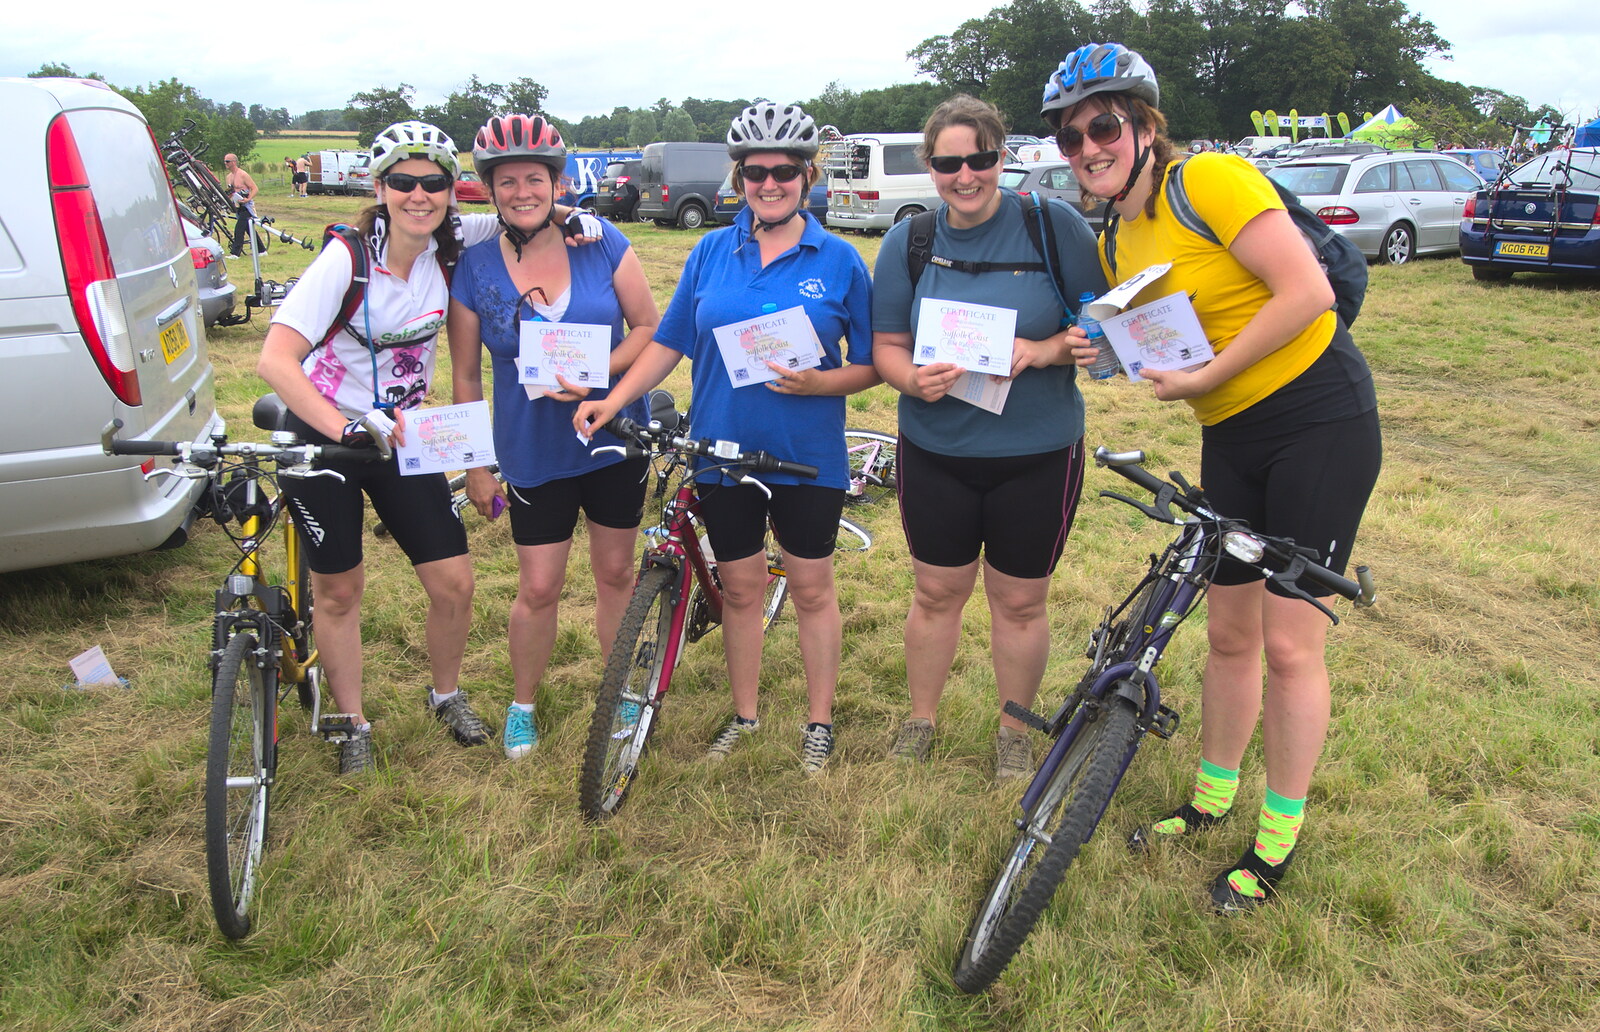 The riders return and show off their certificates from The RSPB Charity Bike Ride, Little Glemham, Suffolk - 5th August 2012